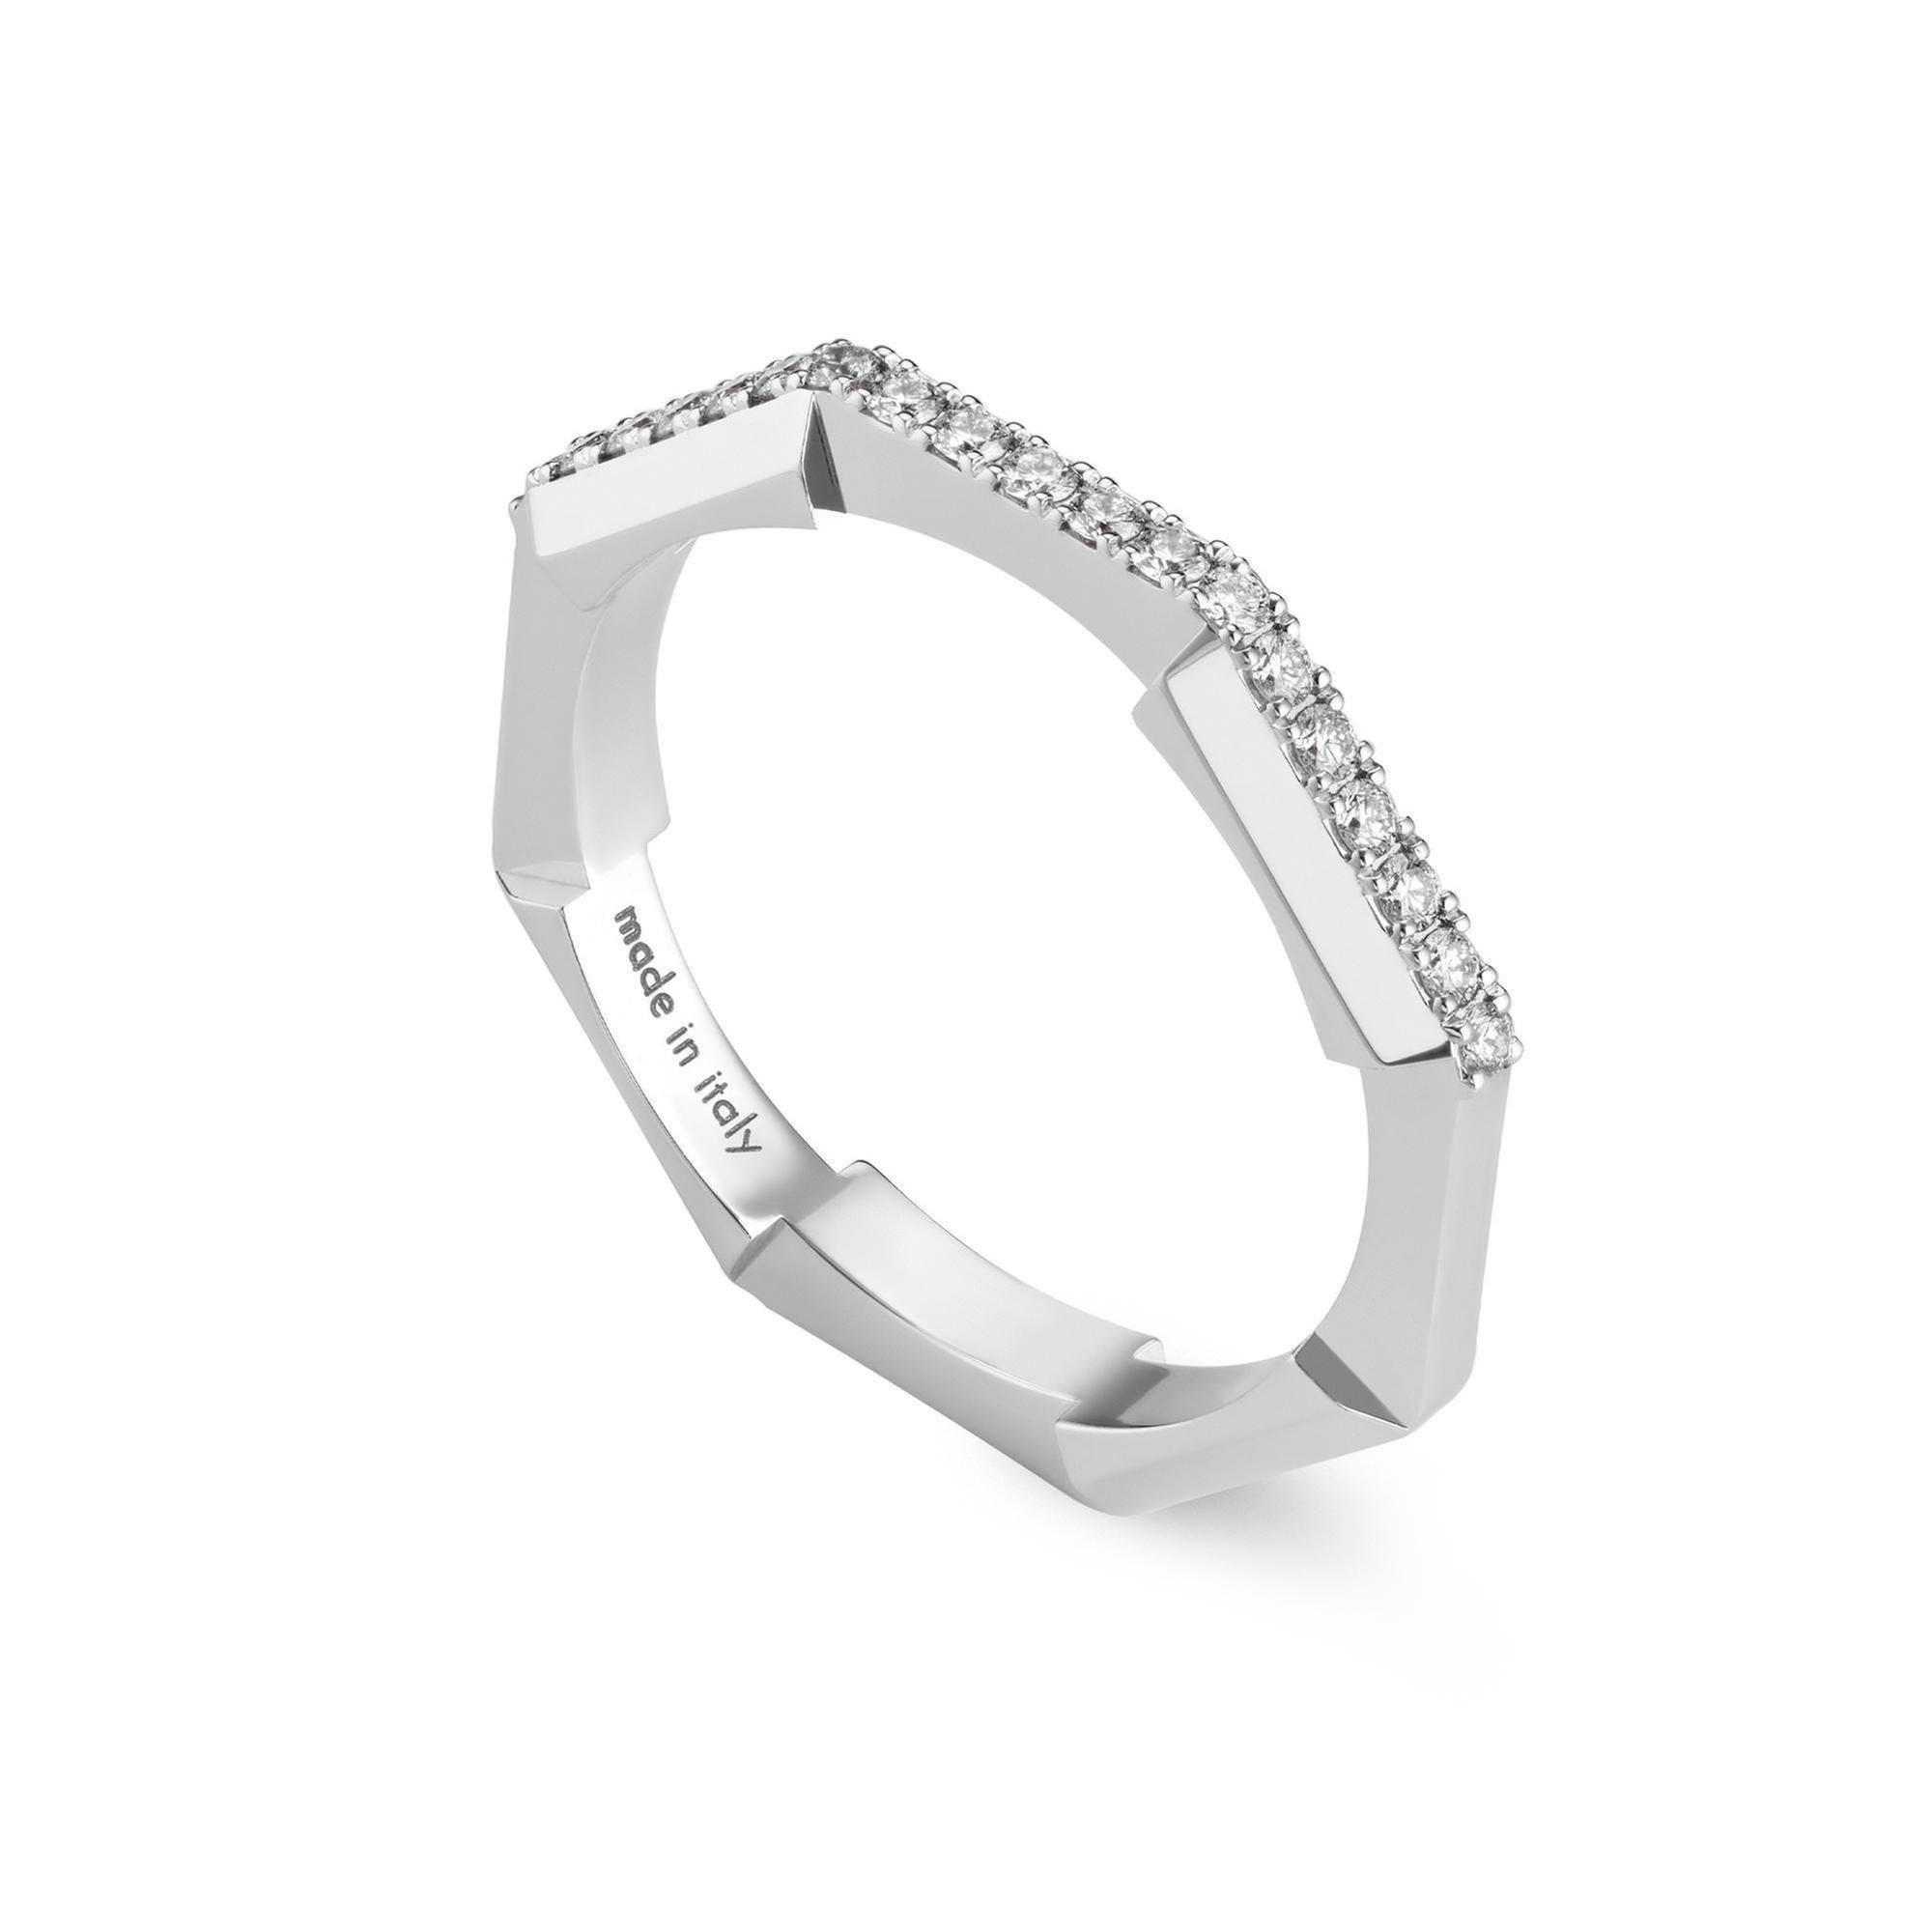 Gucci Link To Love Diamond Pave Ring in White Gold 1/6ctw - Size 7.25